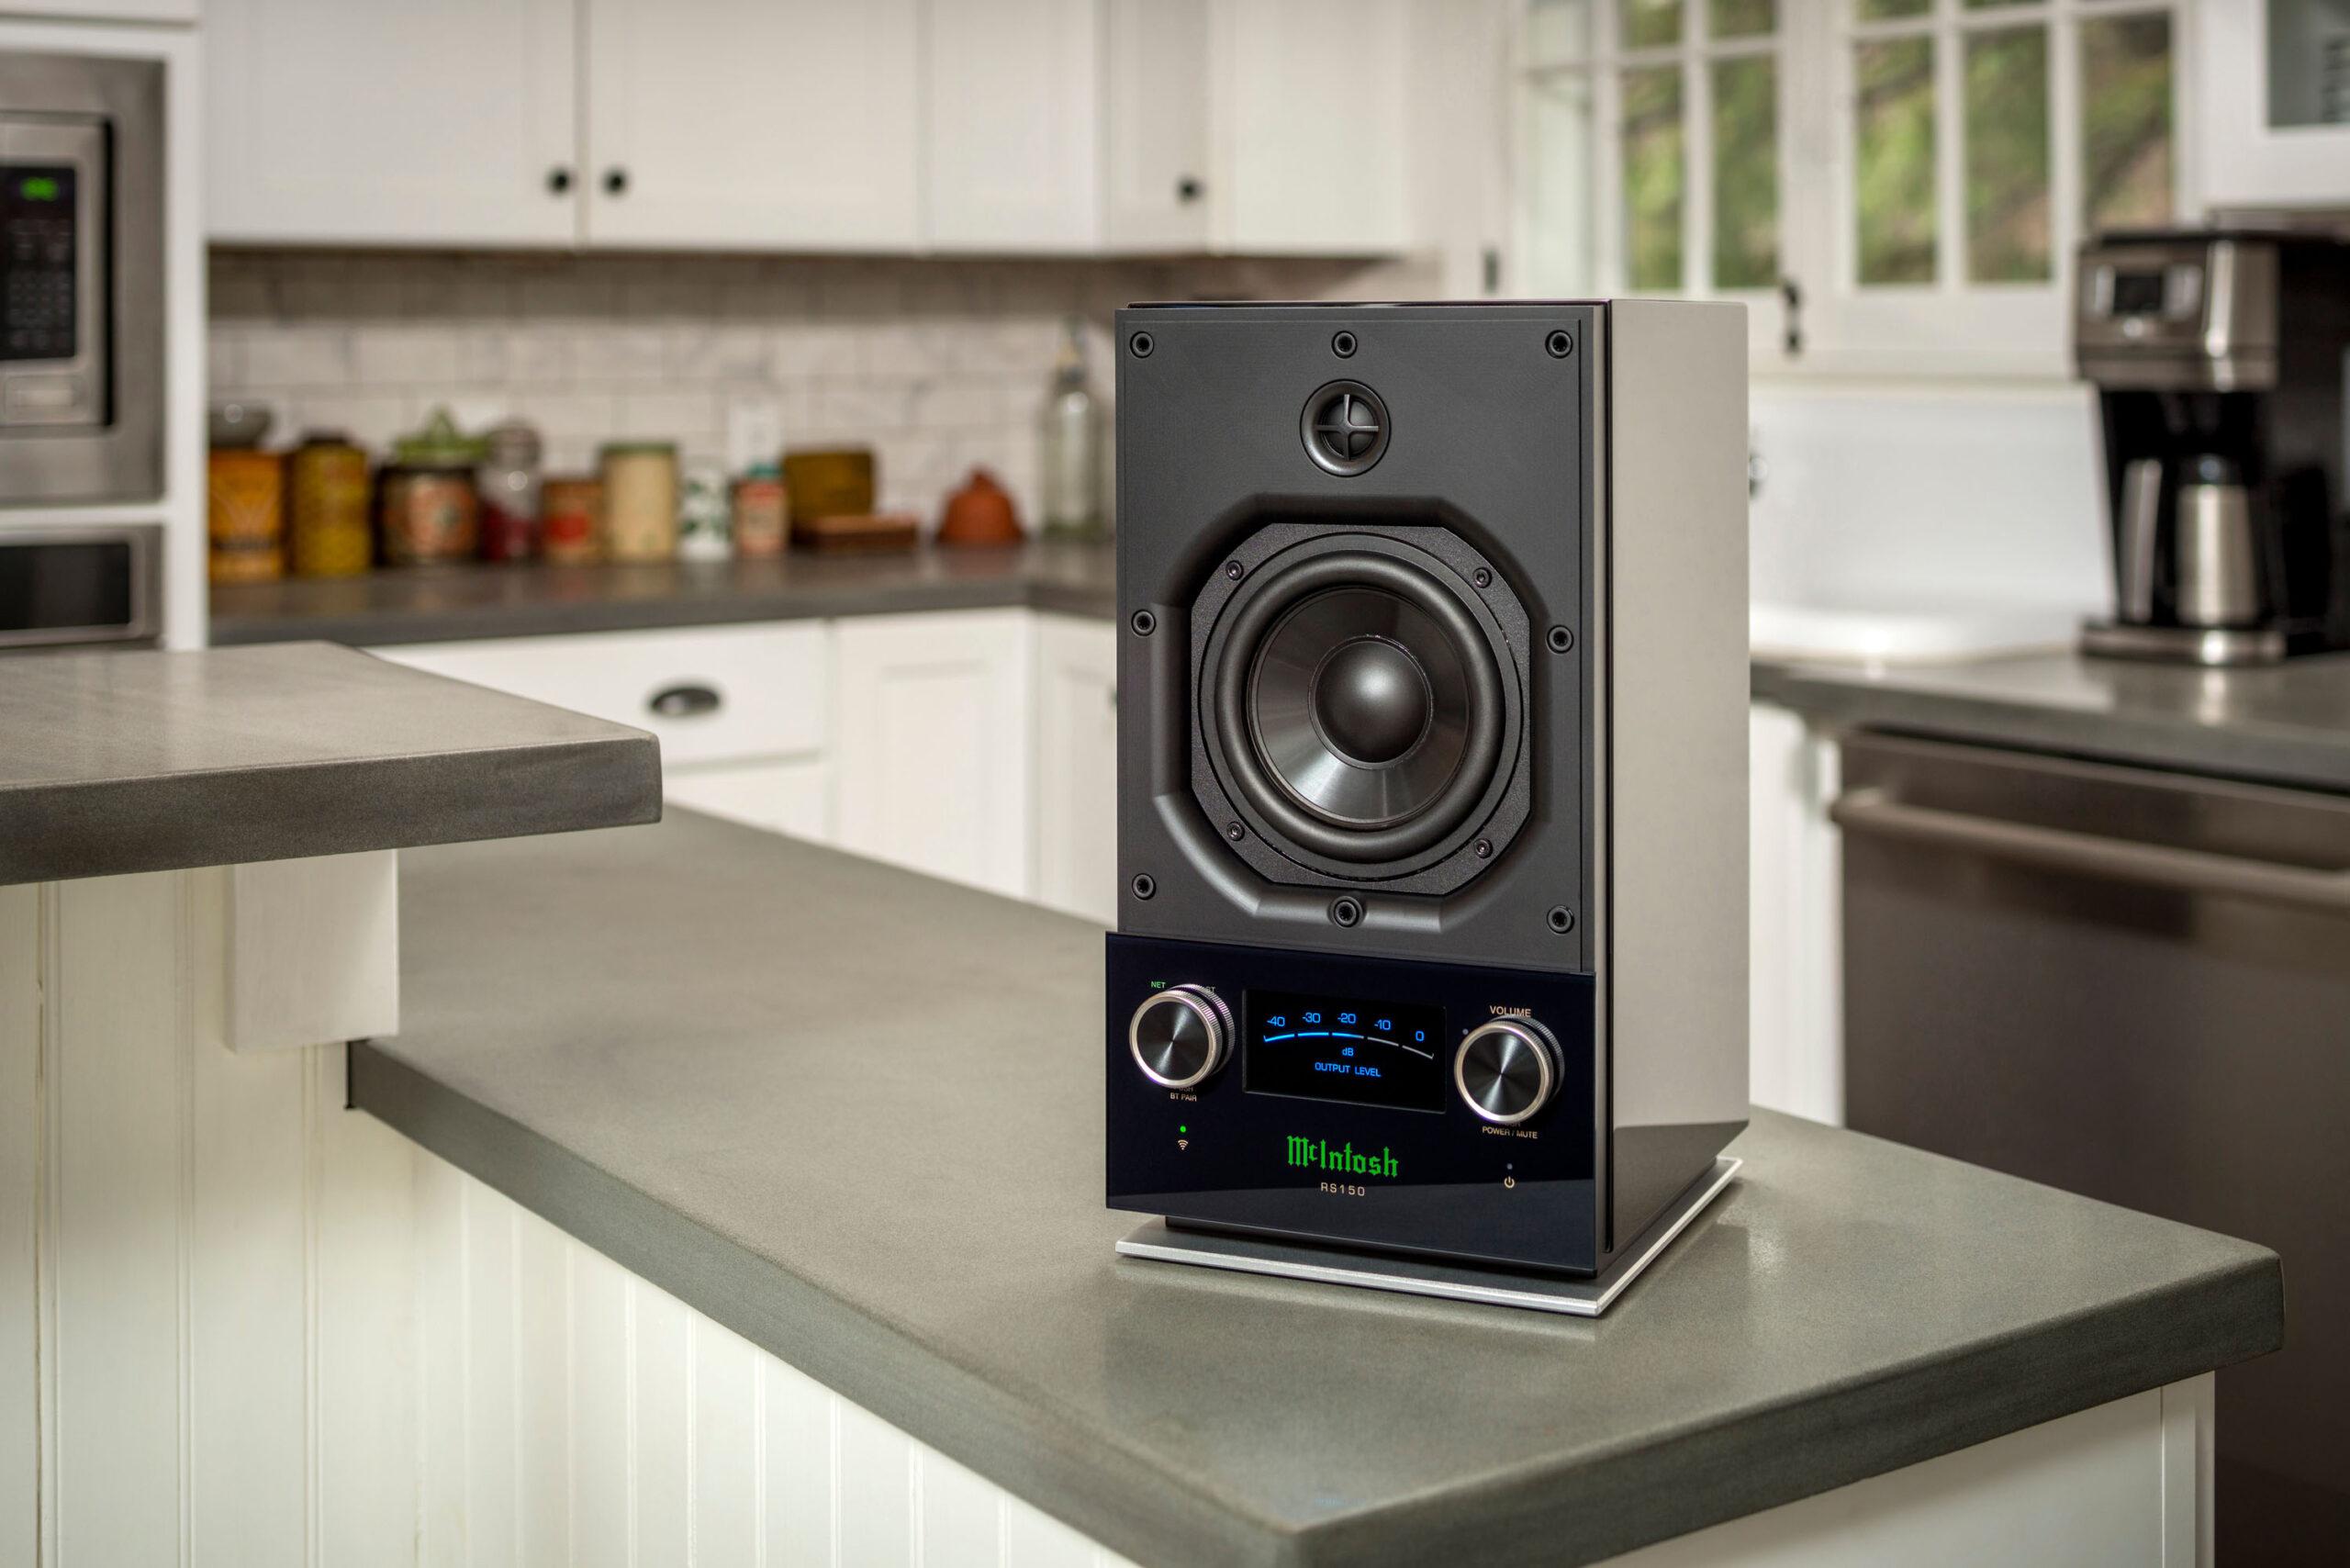 Two wireless speakers, the RS150 and RS250, offer streaming convenience with unmistakable McIntosh style, quality & performance. McIntosh 39c8e1a5 rs150 lifestyle counter no grille hi res scaled